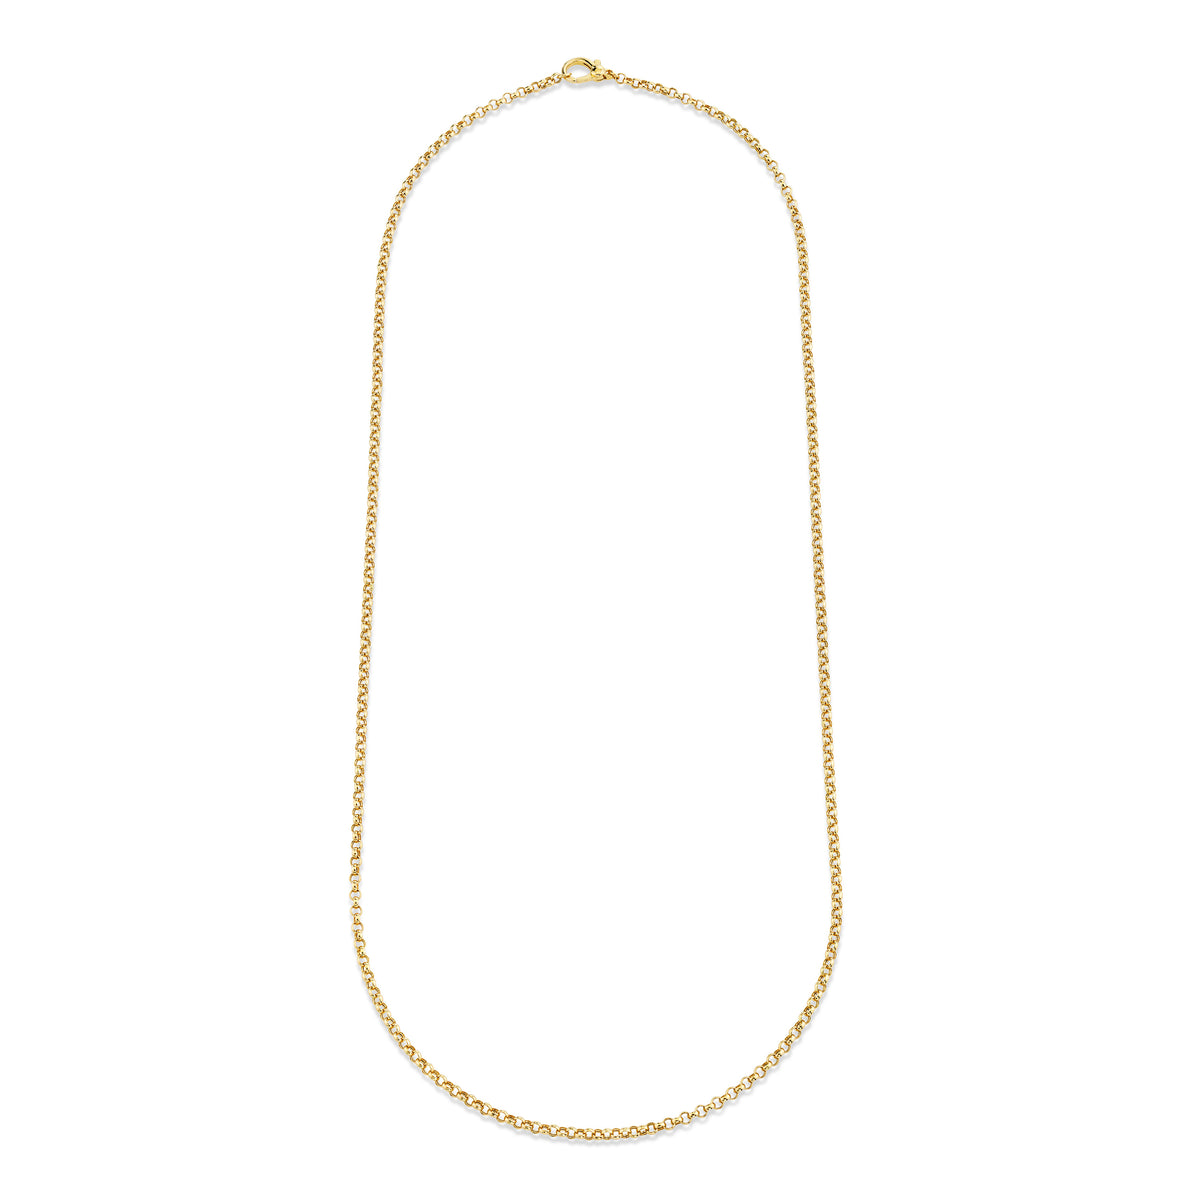 READY TO SHIP MEN'S SOLID GOLD ROLO CHAIN